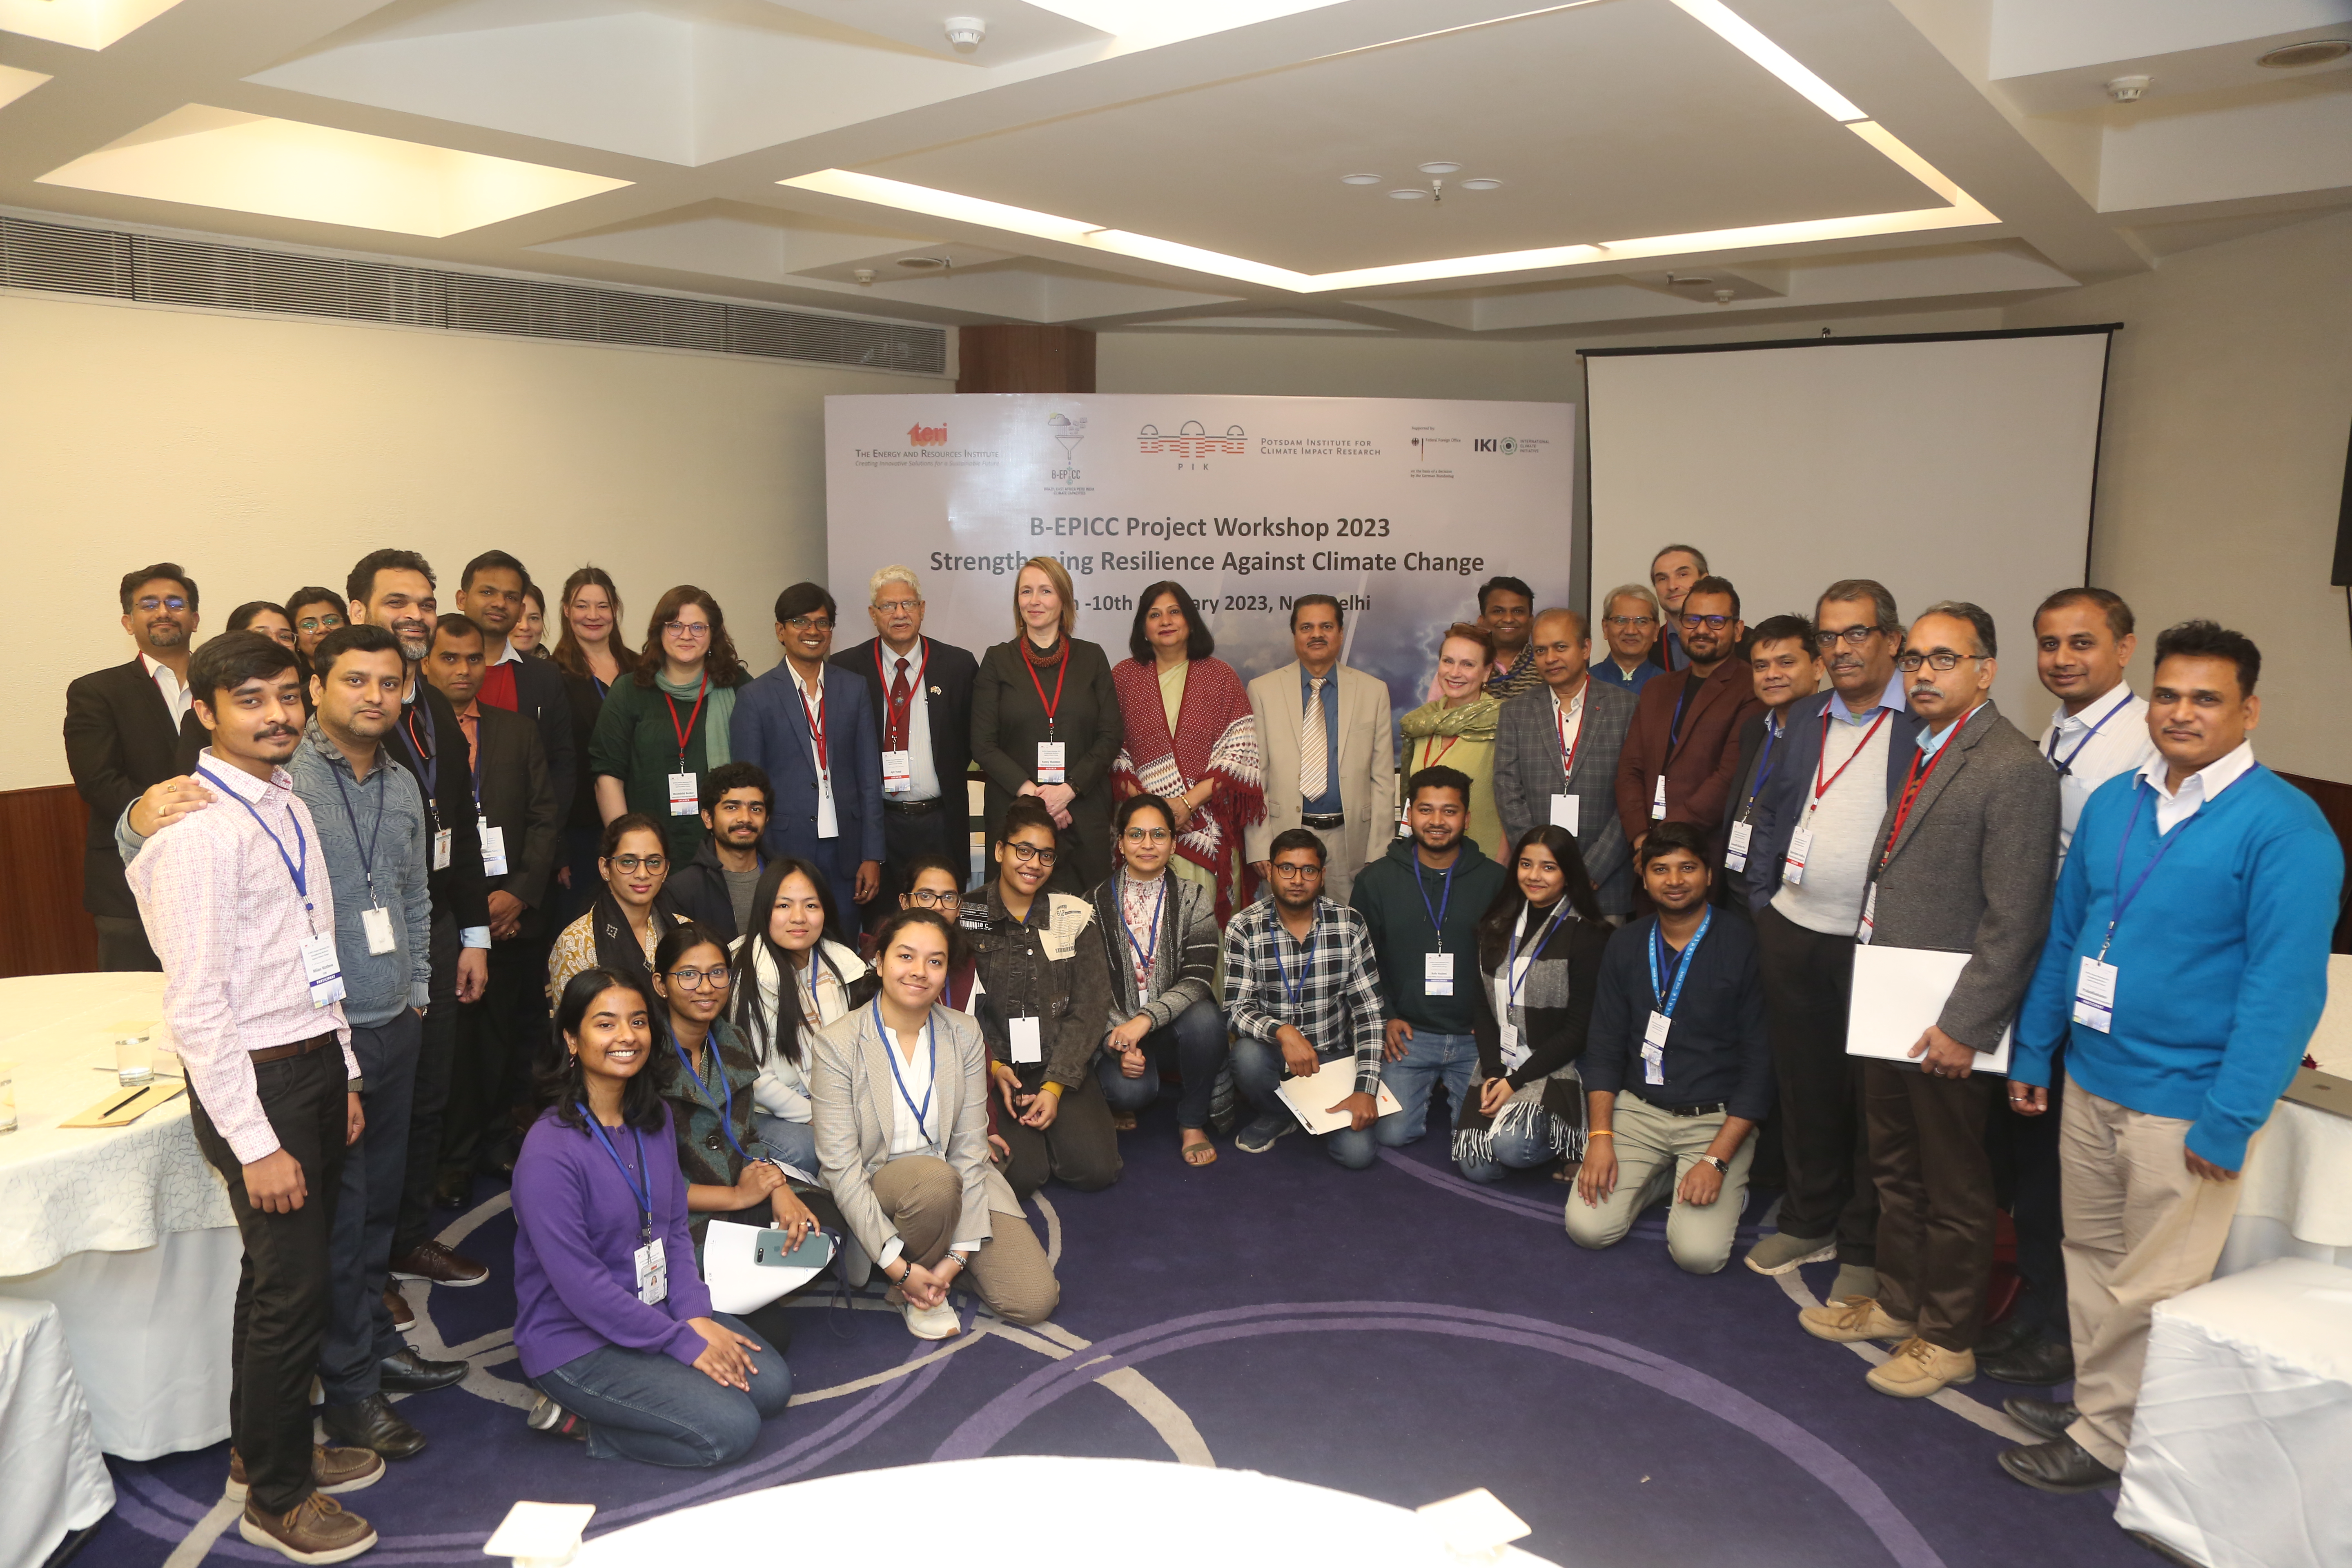 B-EPICC Workshop "Strengthening Resilience against Climate Change“ in India